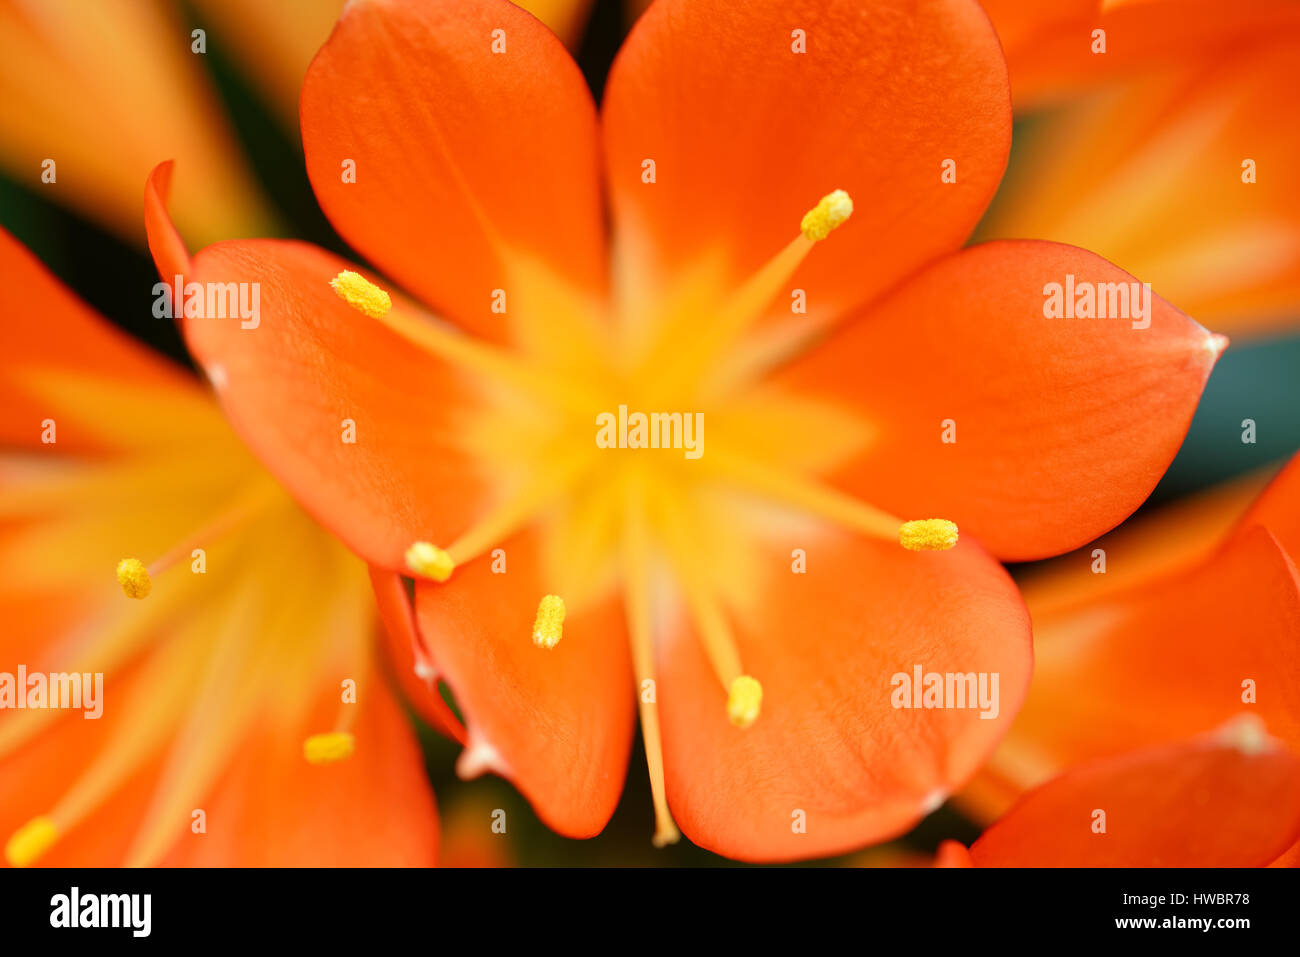 Plants and flowers: orange Clivia Miniata, bush lily close-up shot, shallow DOF, natural abstract background Stock Photo